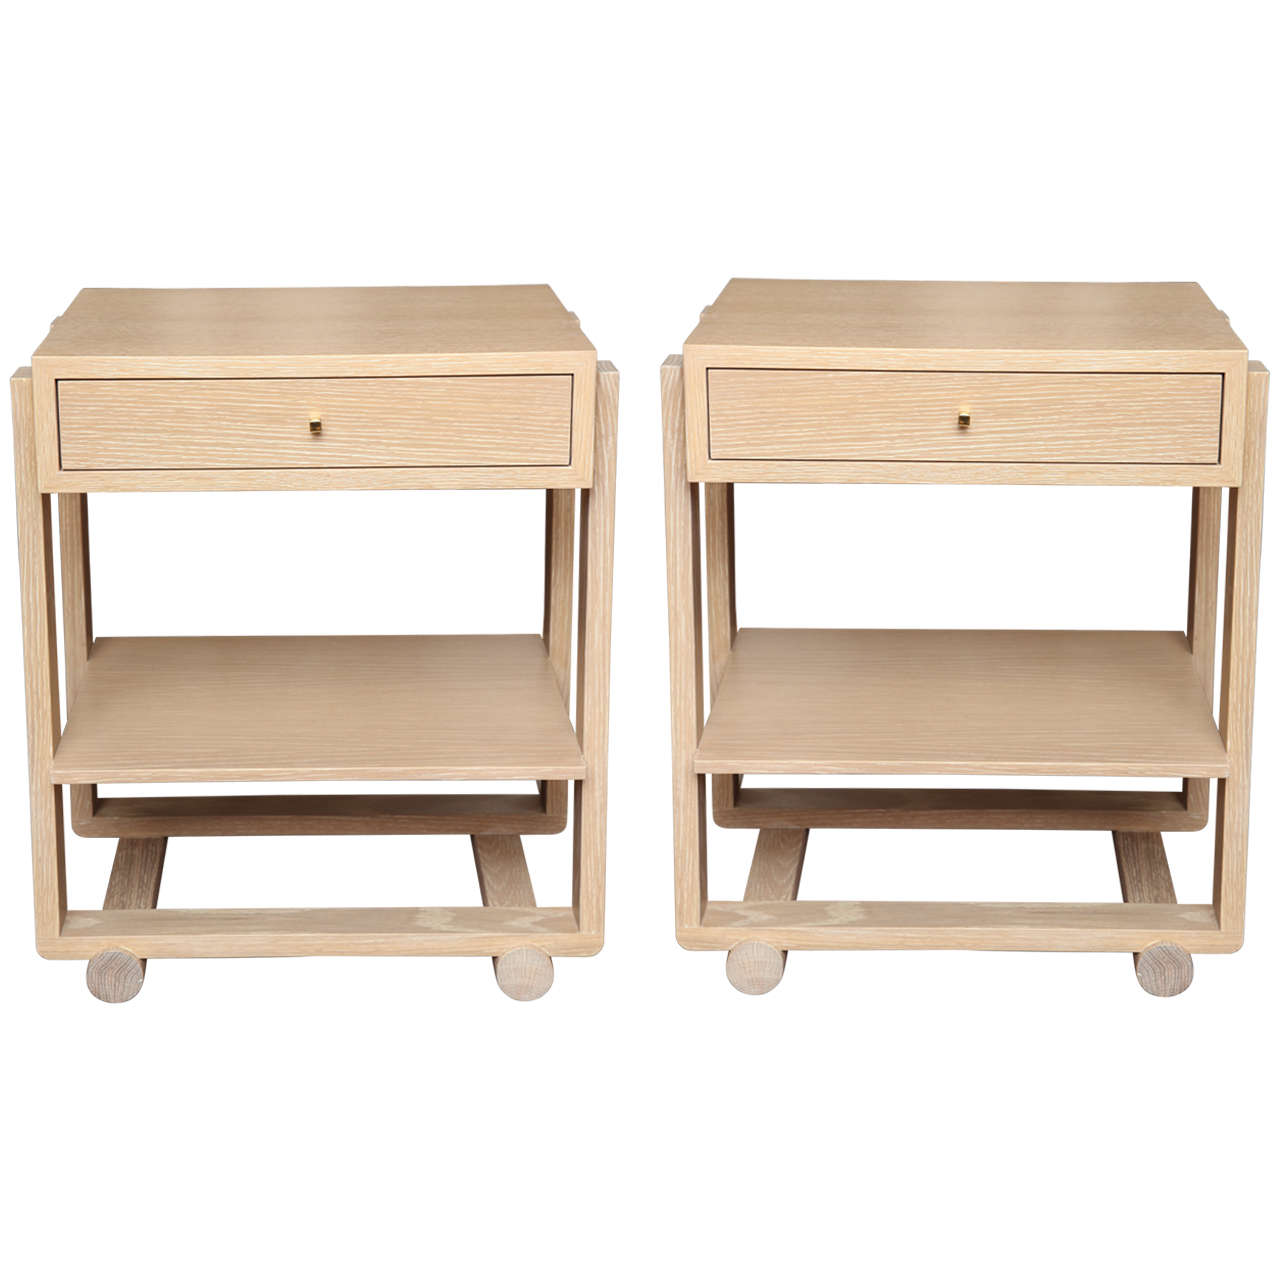 Pair of Small Staple Tables by Duane Modern For Sale